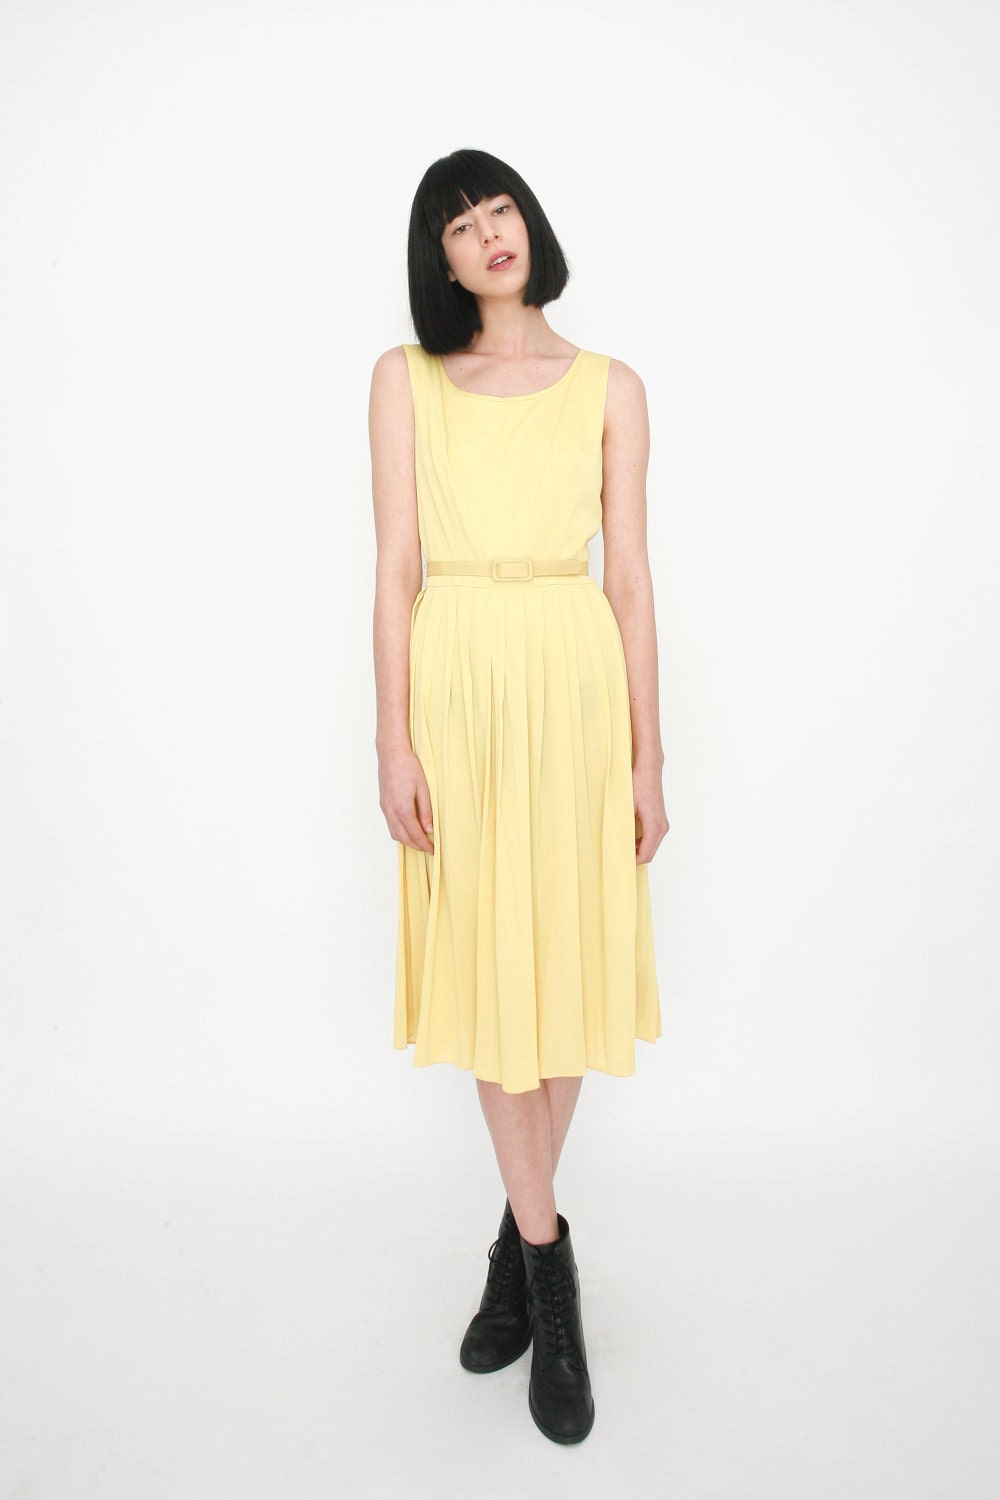 Vintage 1950's Yellow Dress with Belted Waist and Pleated Skirt